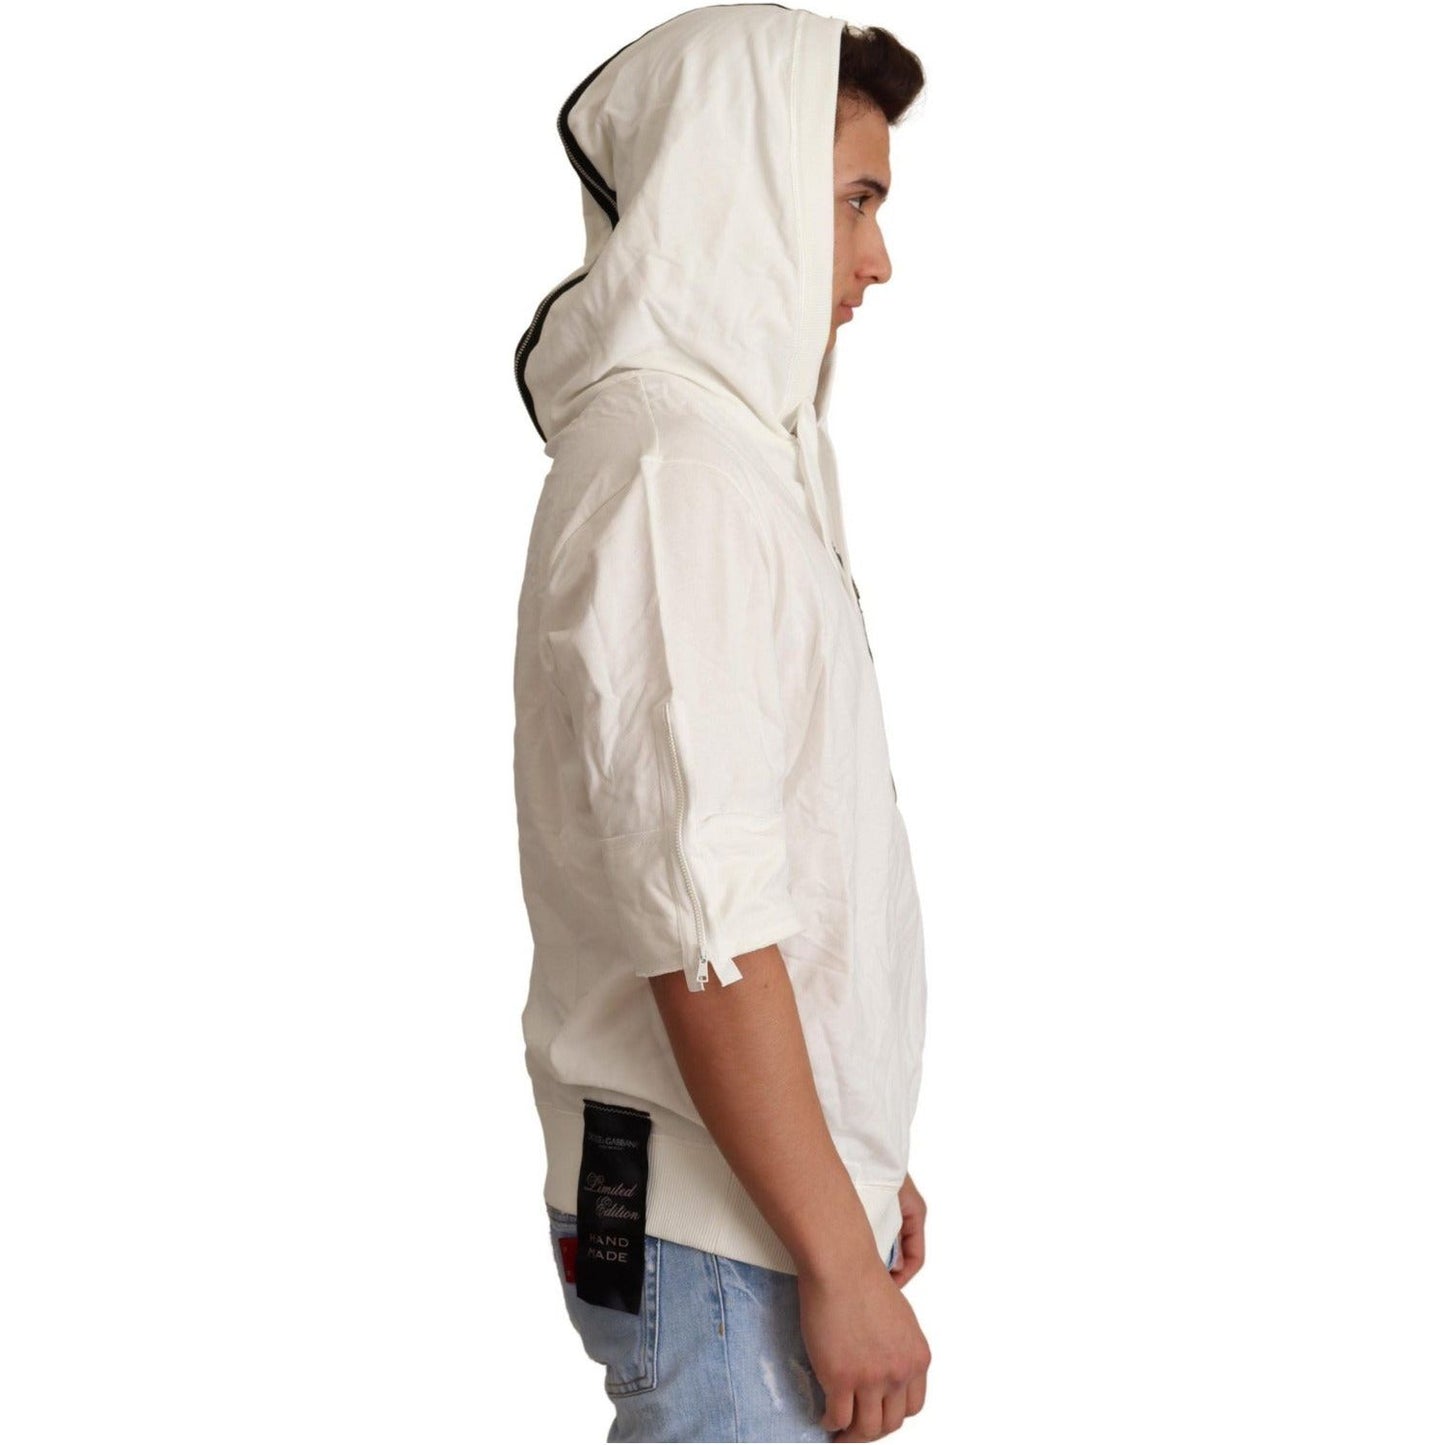 Dolce & Gabbana Exquisite Off-White Cotton Hooded Sweater MAN SWEATERS white-hooded-limited-edition-sweater